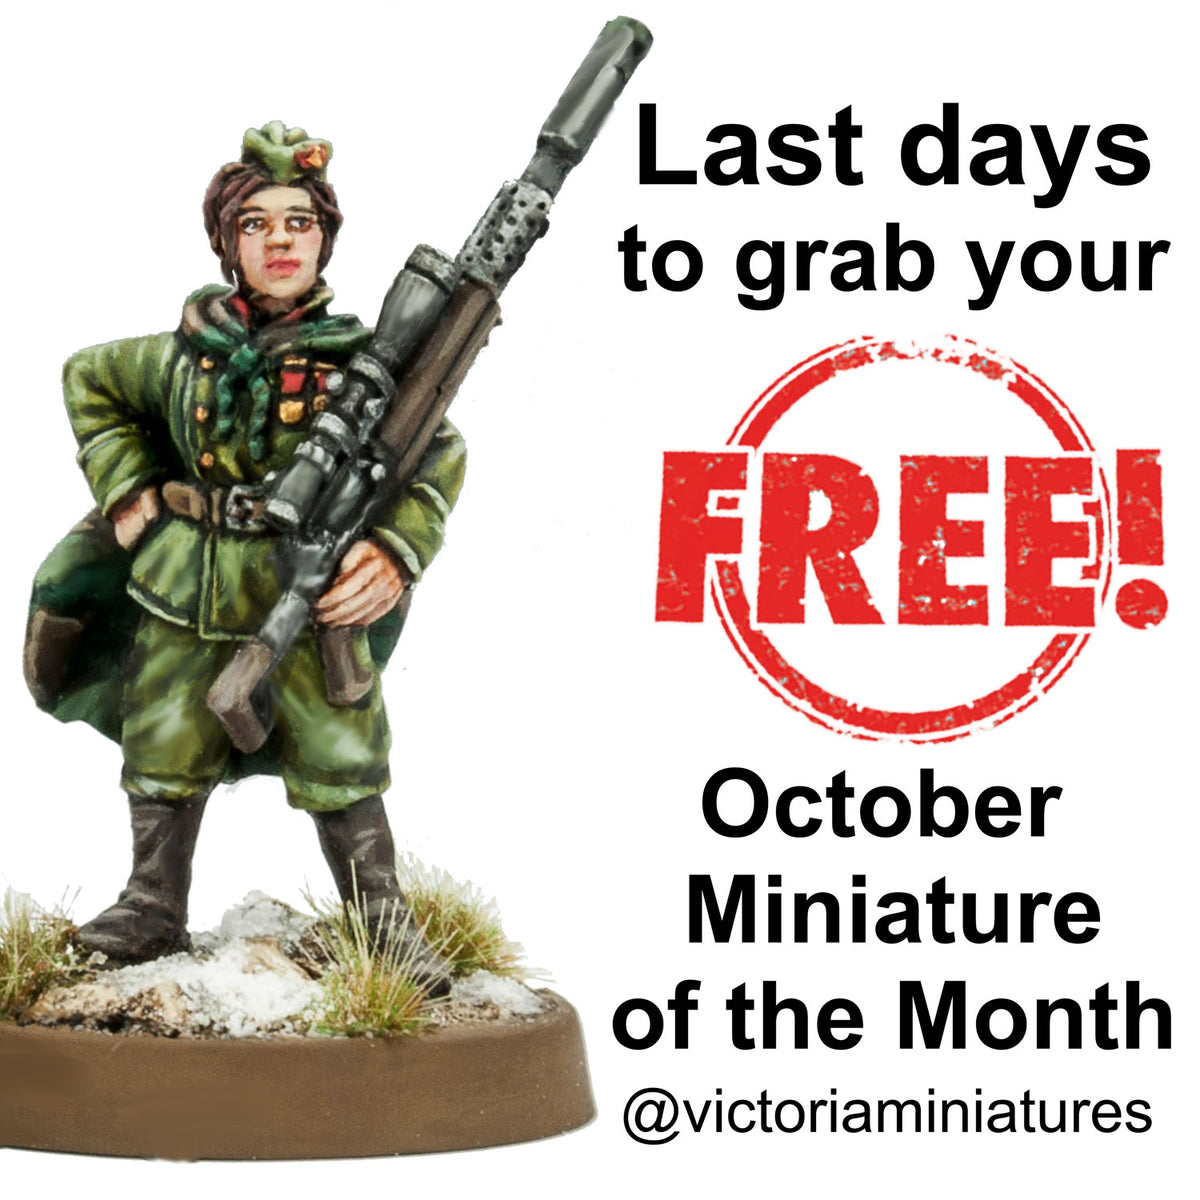 Last Days, for Free October Miniature of the Month.